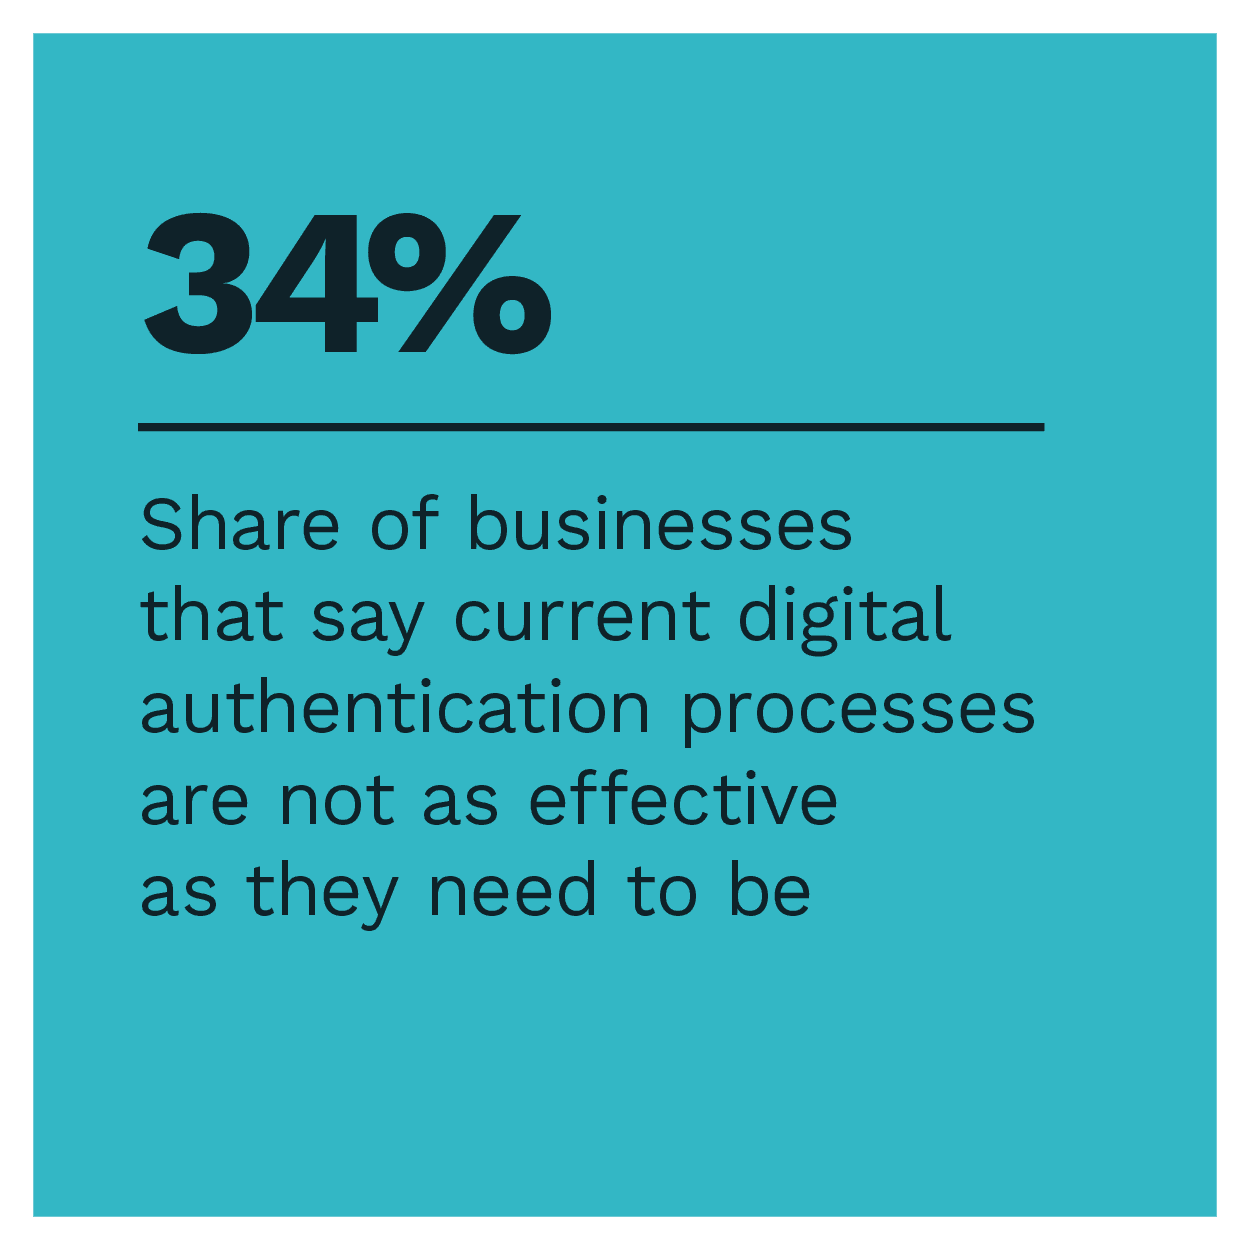 Share of businesses that say current digital authentication processes are not as effective as they need to be